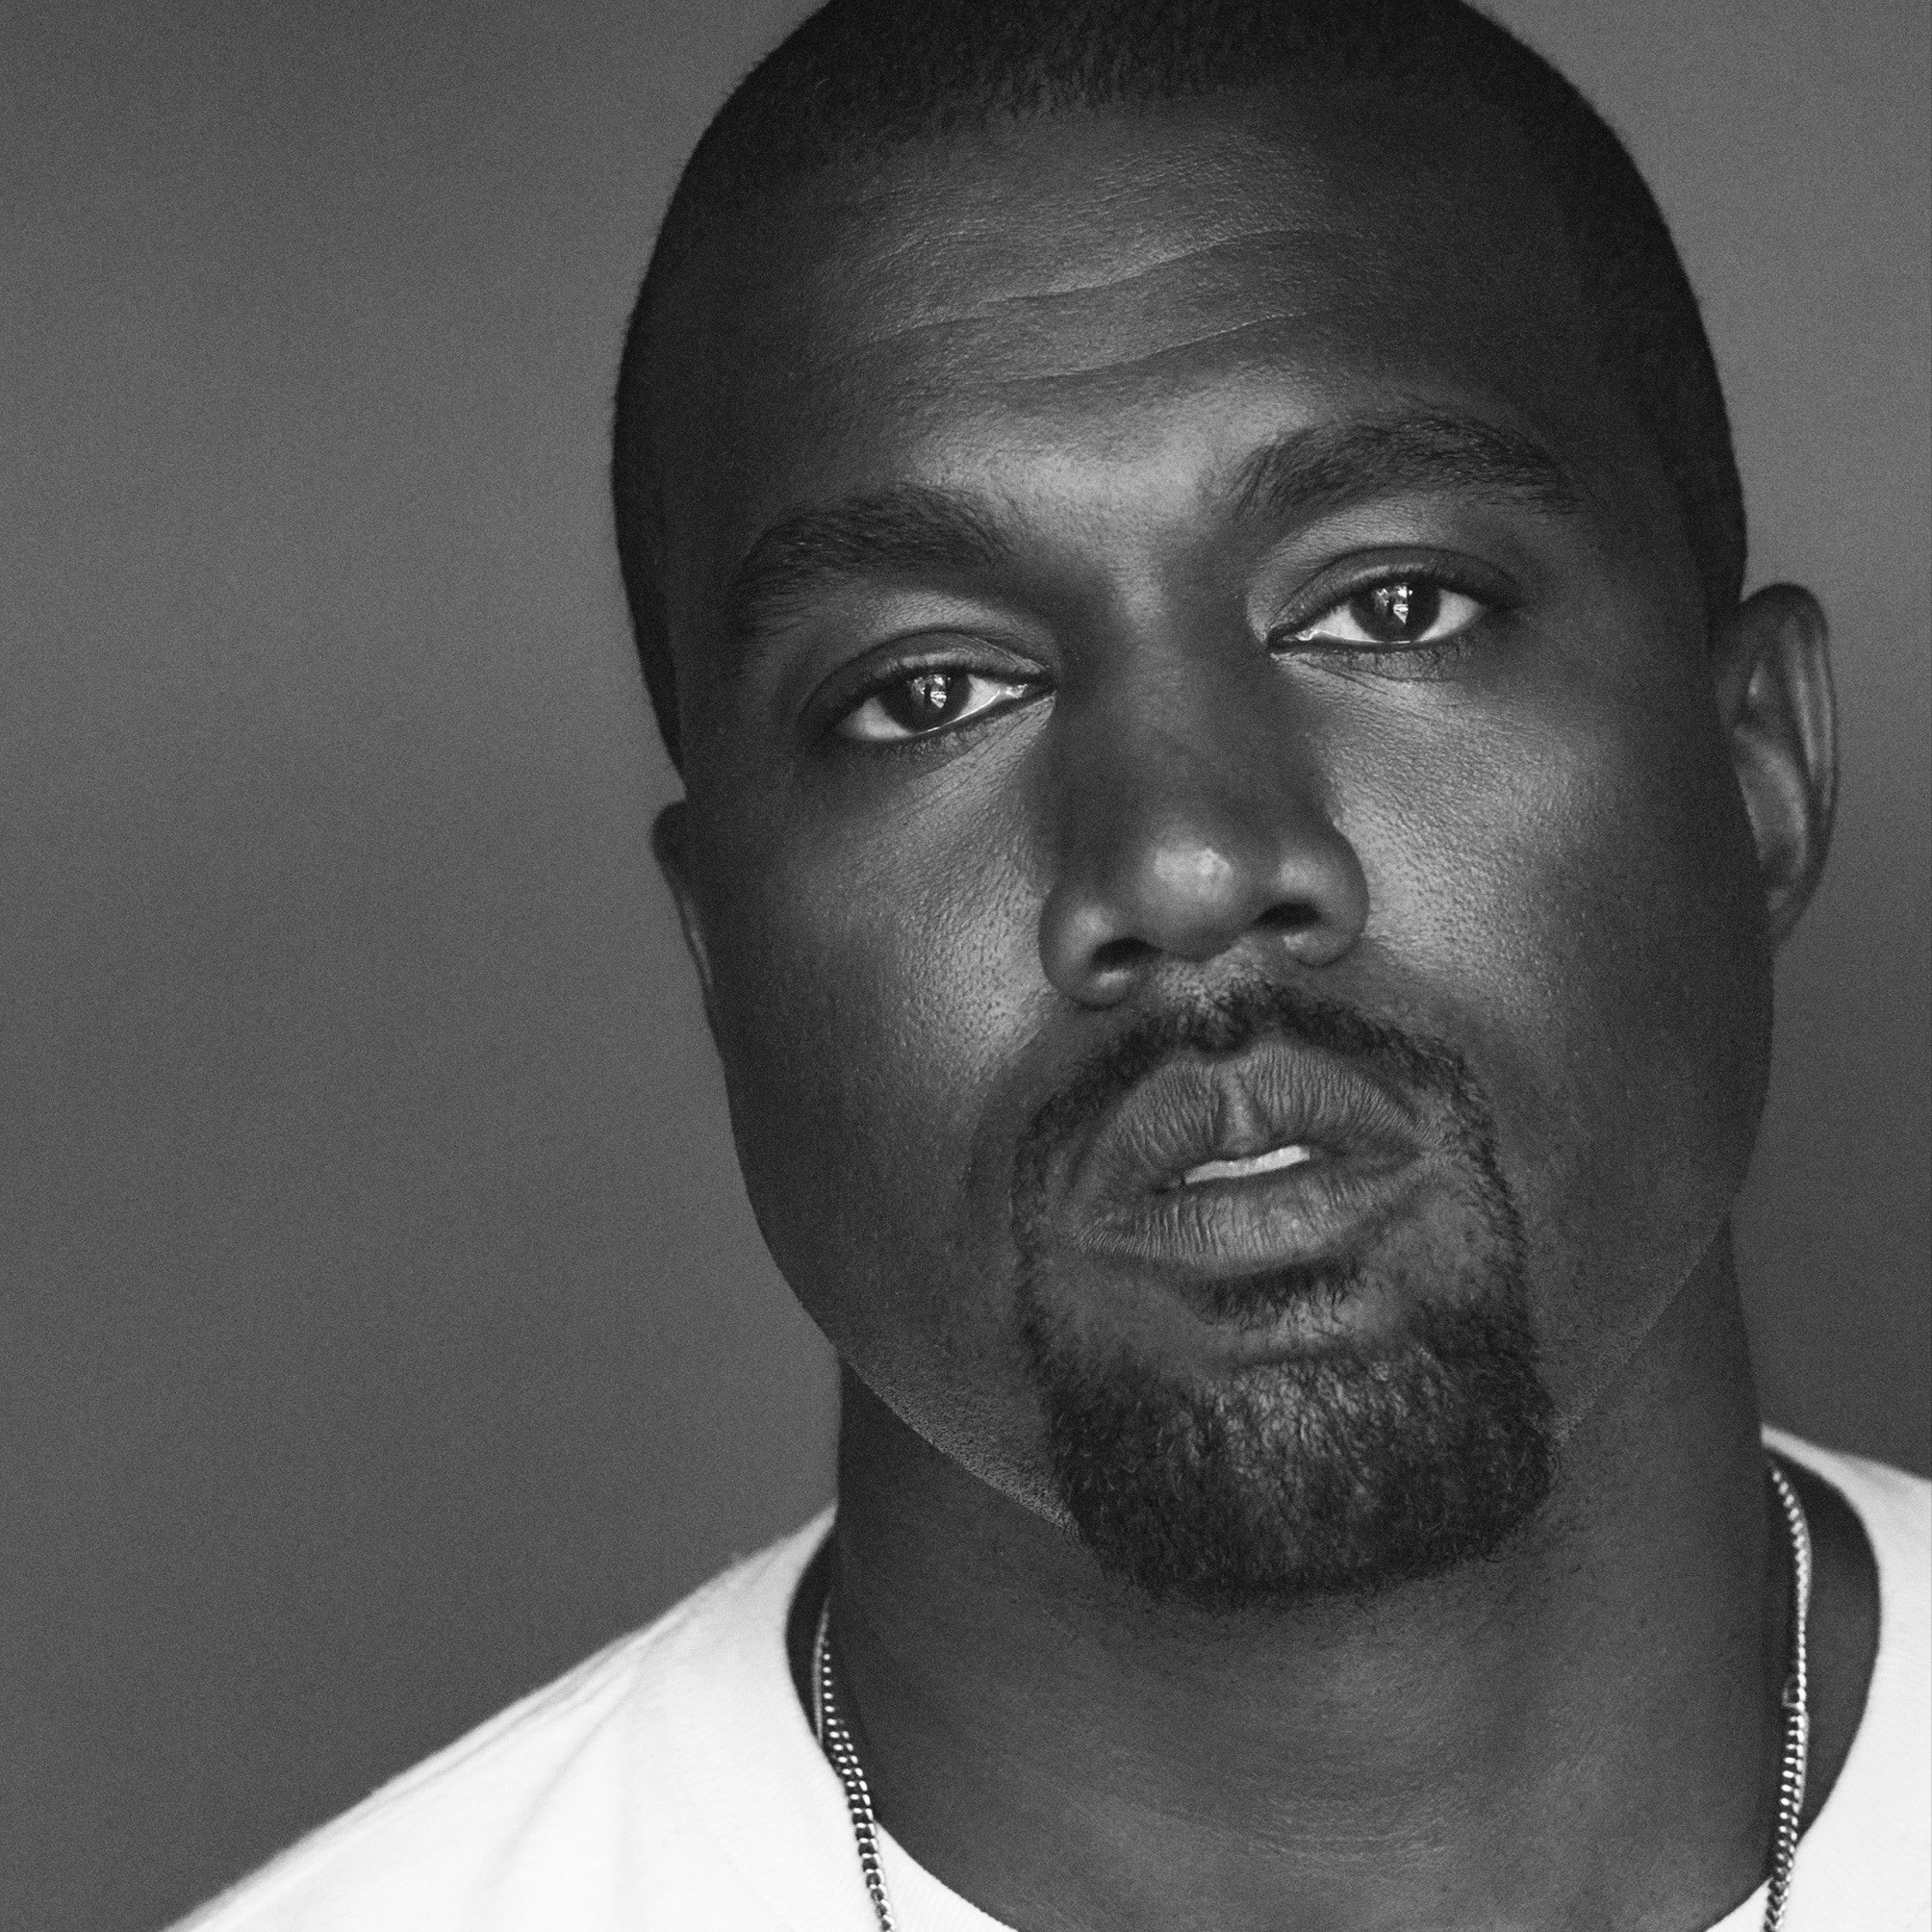 “I struggle with Kanye West being given a platform by anyone”